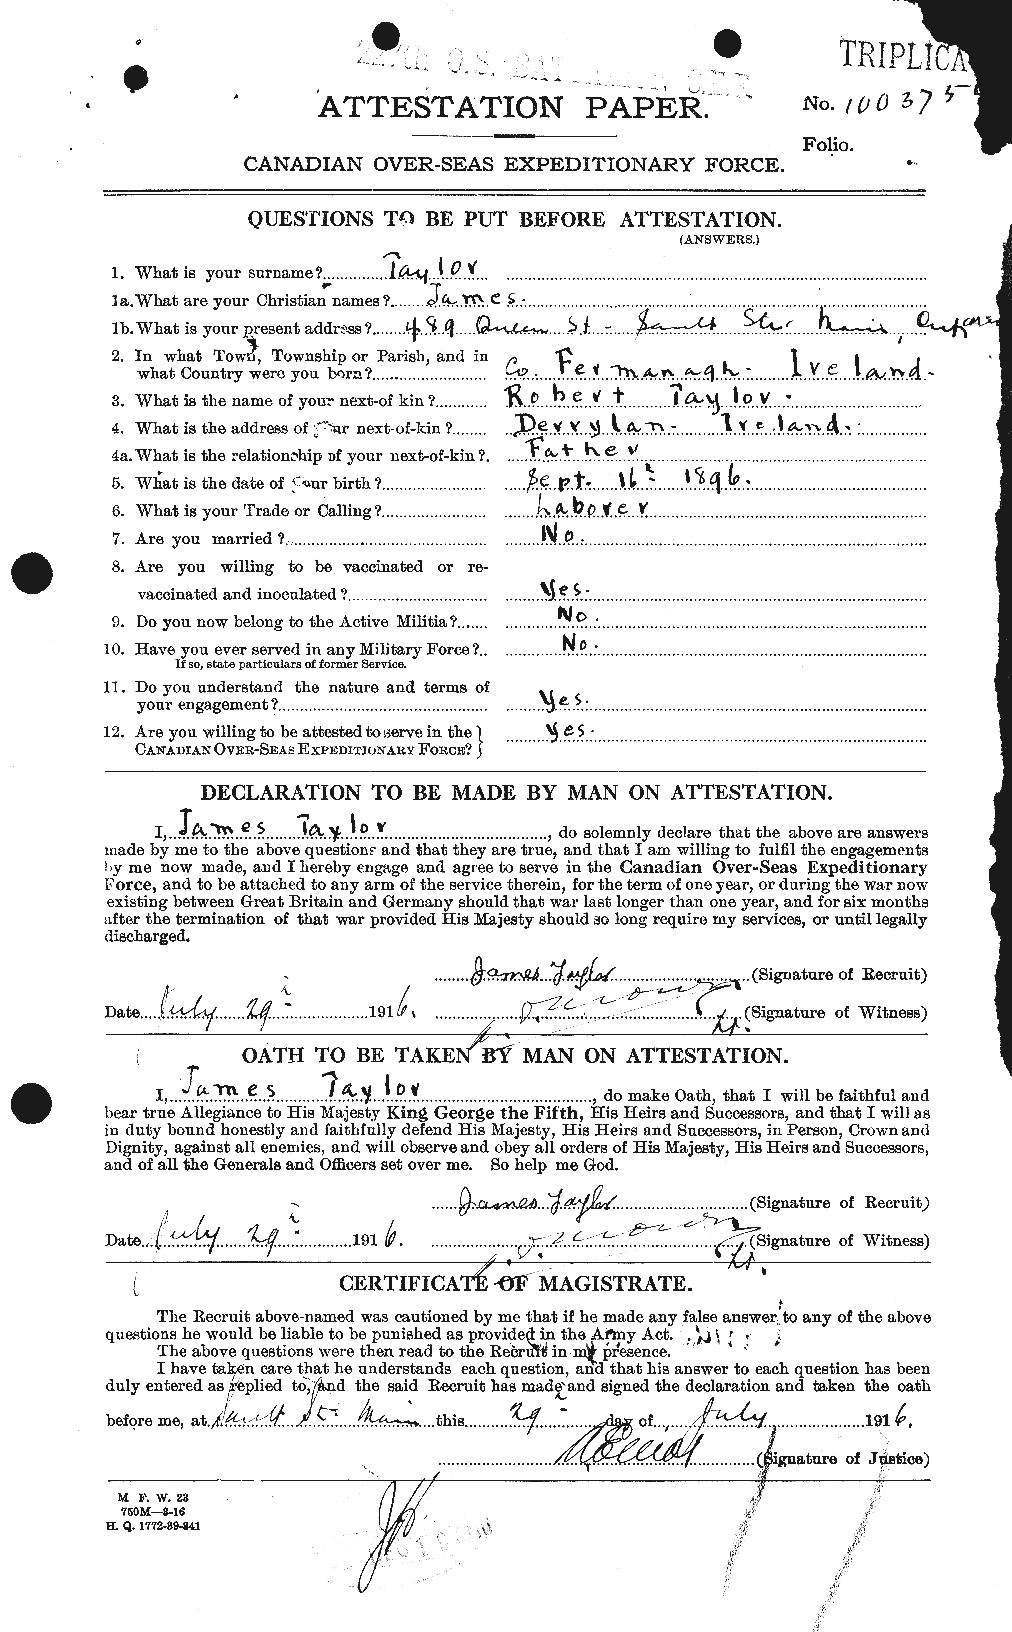 Personnel Records of the First World War - CEF 626656a